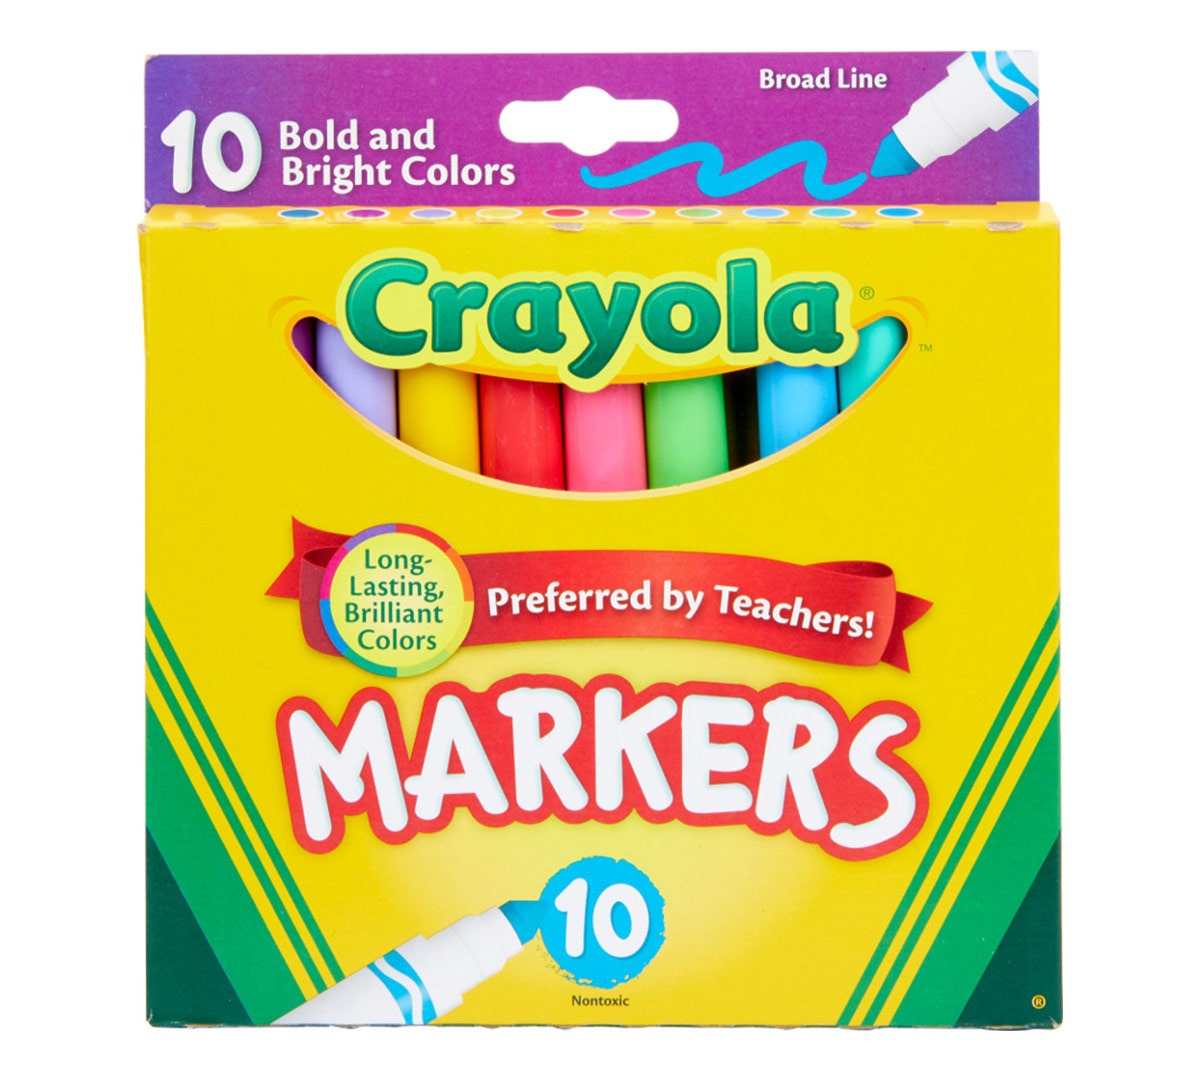 https://shop.crayola.com/on/demandware.static/-/Sites-crayola-storefront/default/dwb471bd71/images/58-7725-0-211_Broad-Line-Markers_Bold-and-Bright-Colors_10ct_F1.jpg